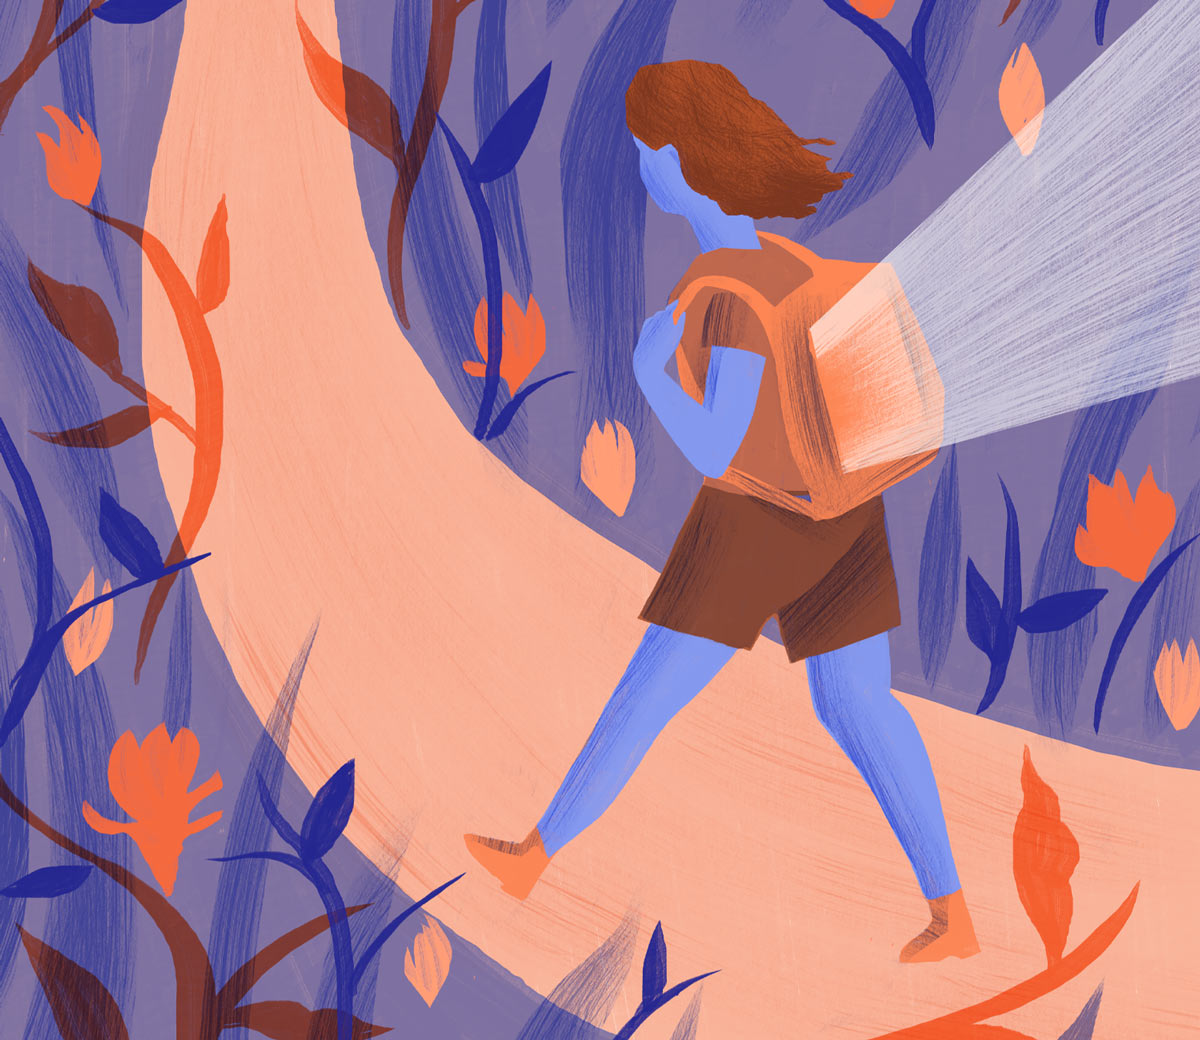 Painting style Illustration of a woman walking along a trail